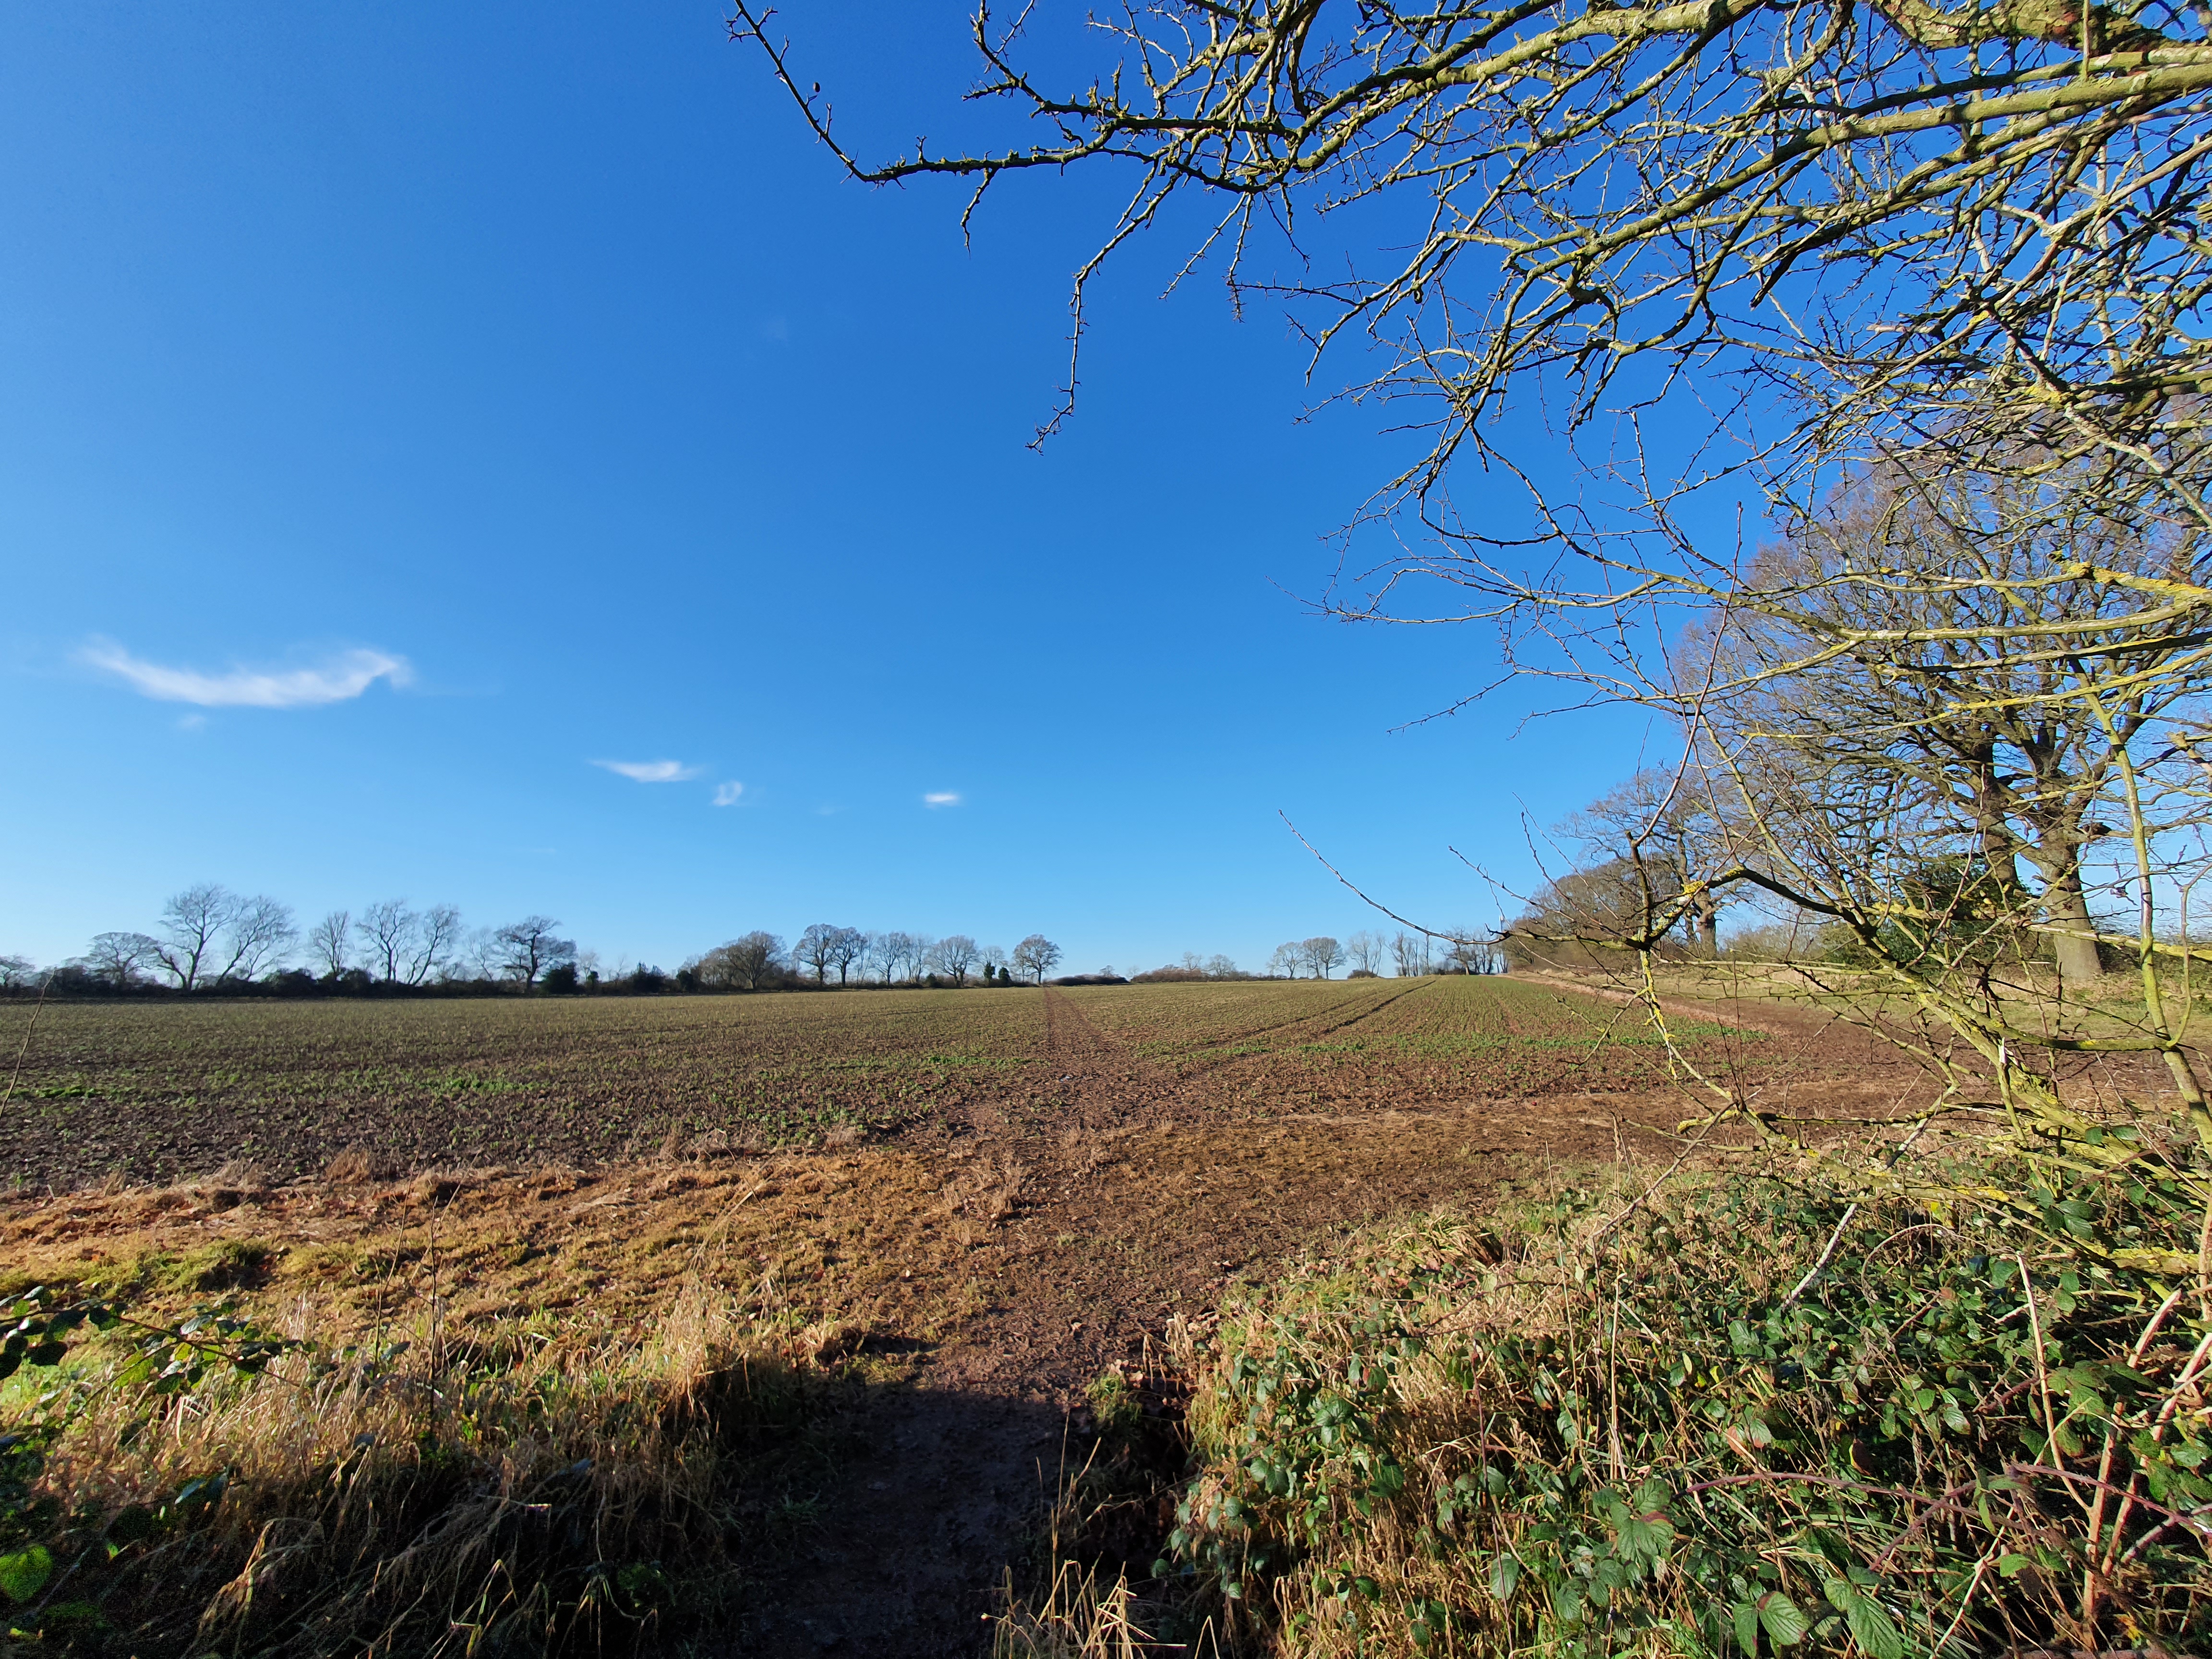 Approach to path across the centre of field to far side